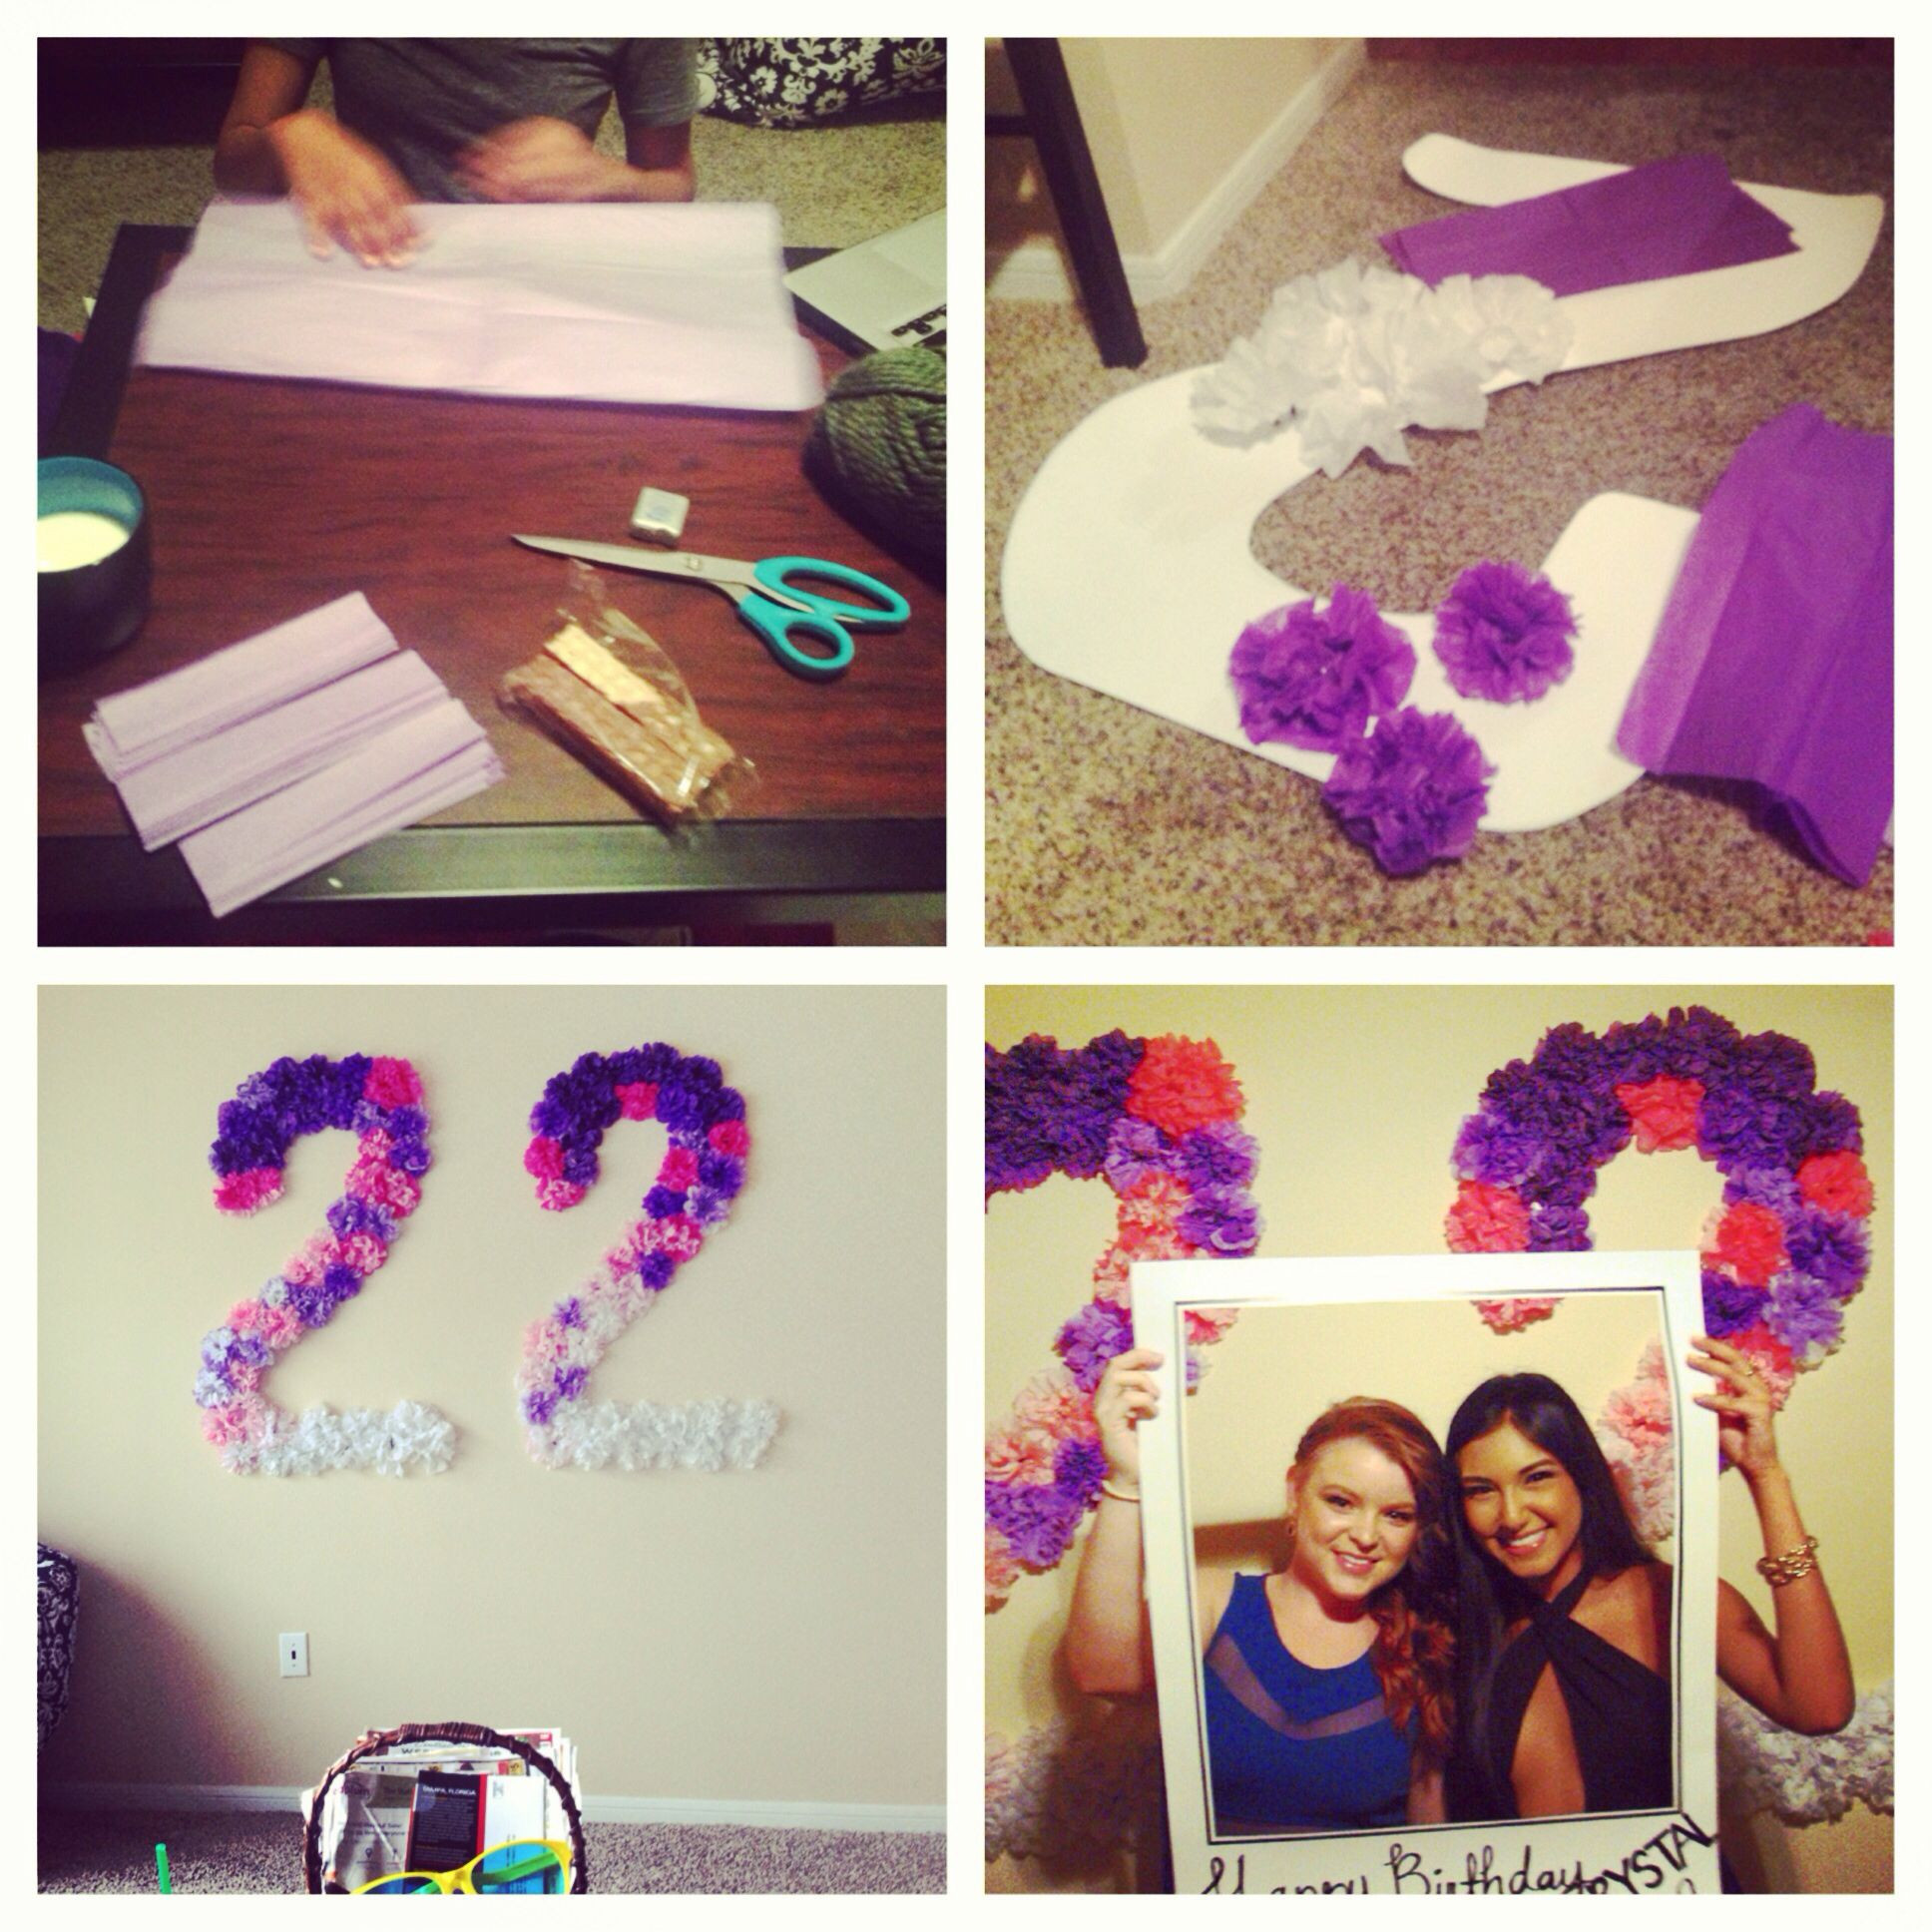 22Nd Birthday Gift Ideas
 A big ombré 22 decoration for my friends 22nd birthday out